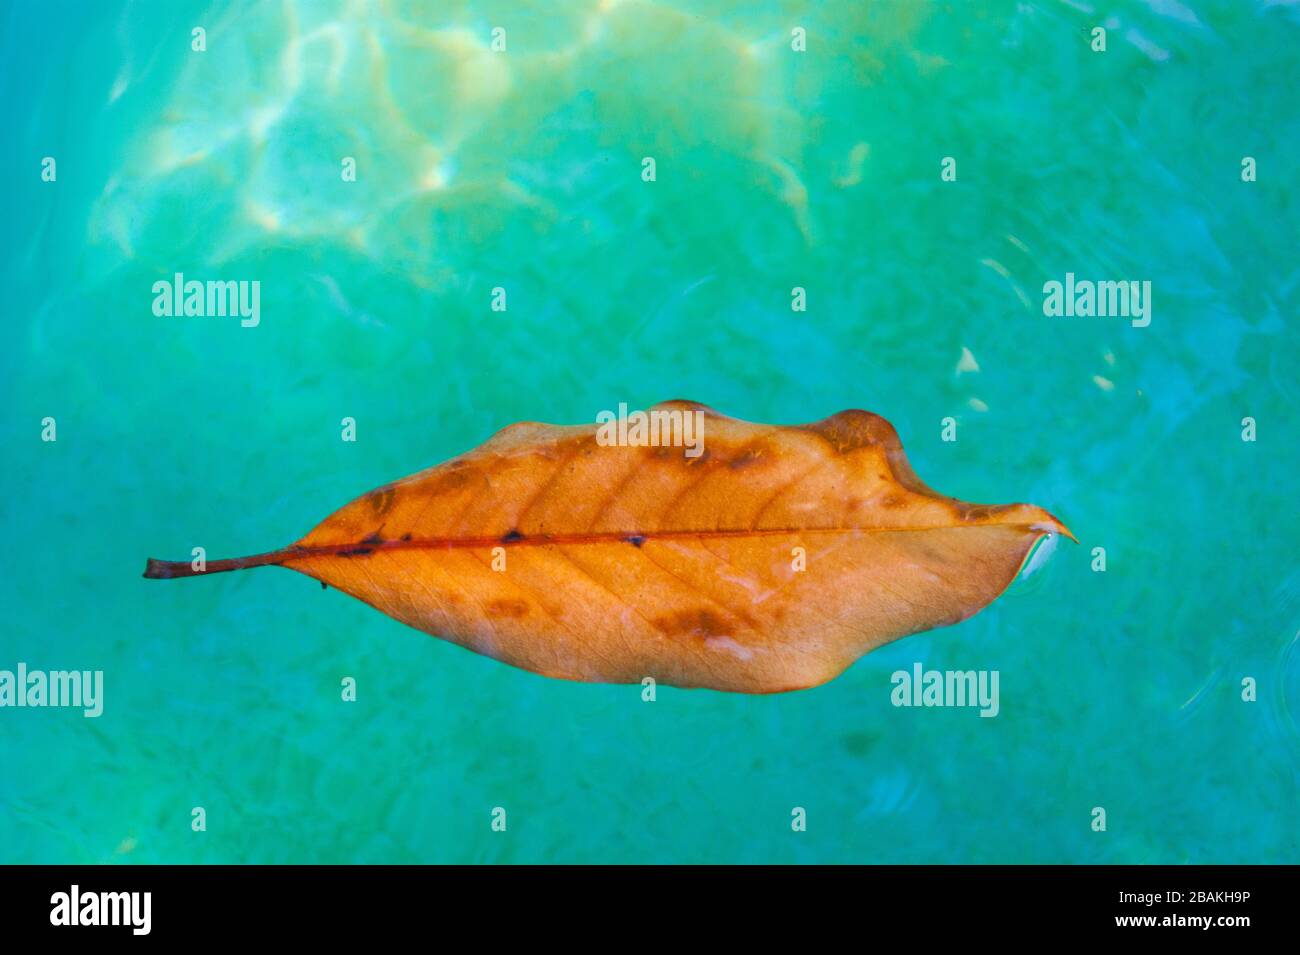 A beautiful orange leaf swims in clear turquoise water. Contrast. Autumn. Stock Photo